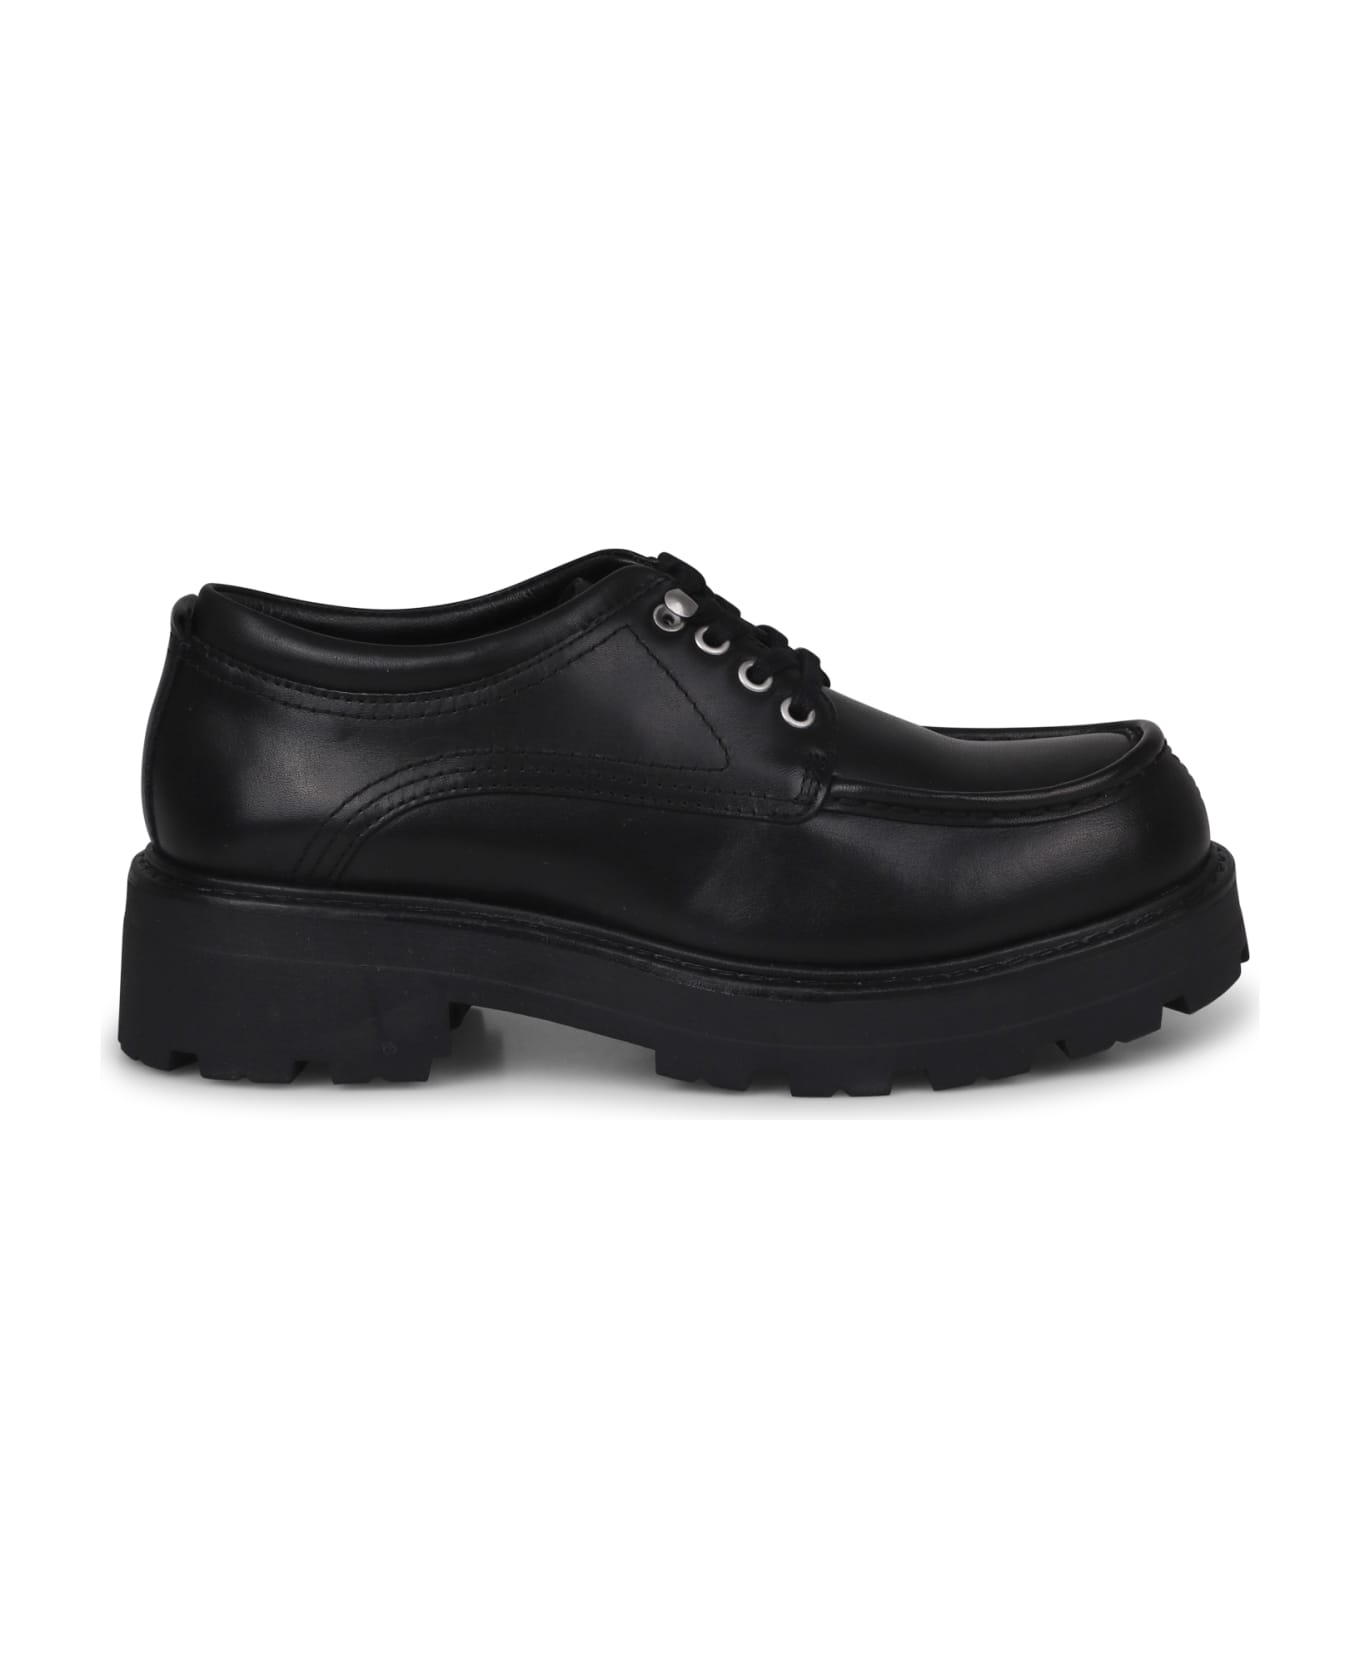 Vagabond Cosmo 2.0 Lace-up Fastening Shoes レースアップシューズ